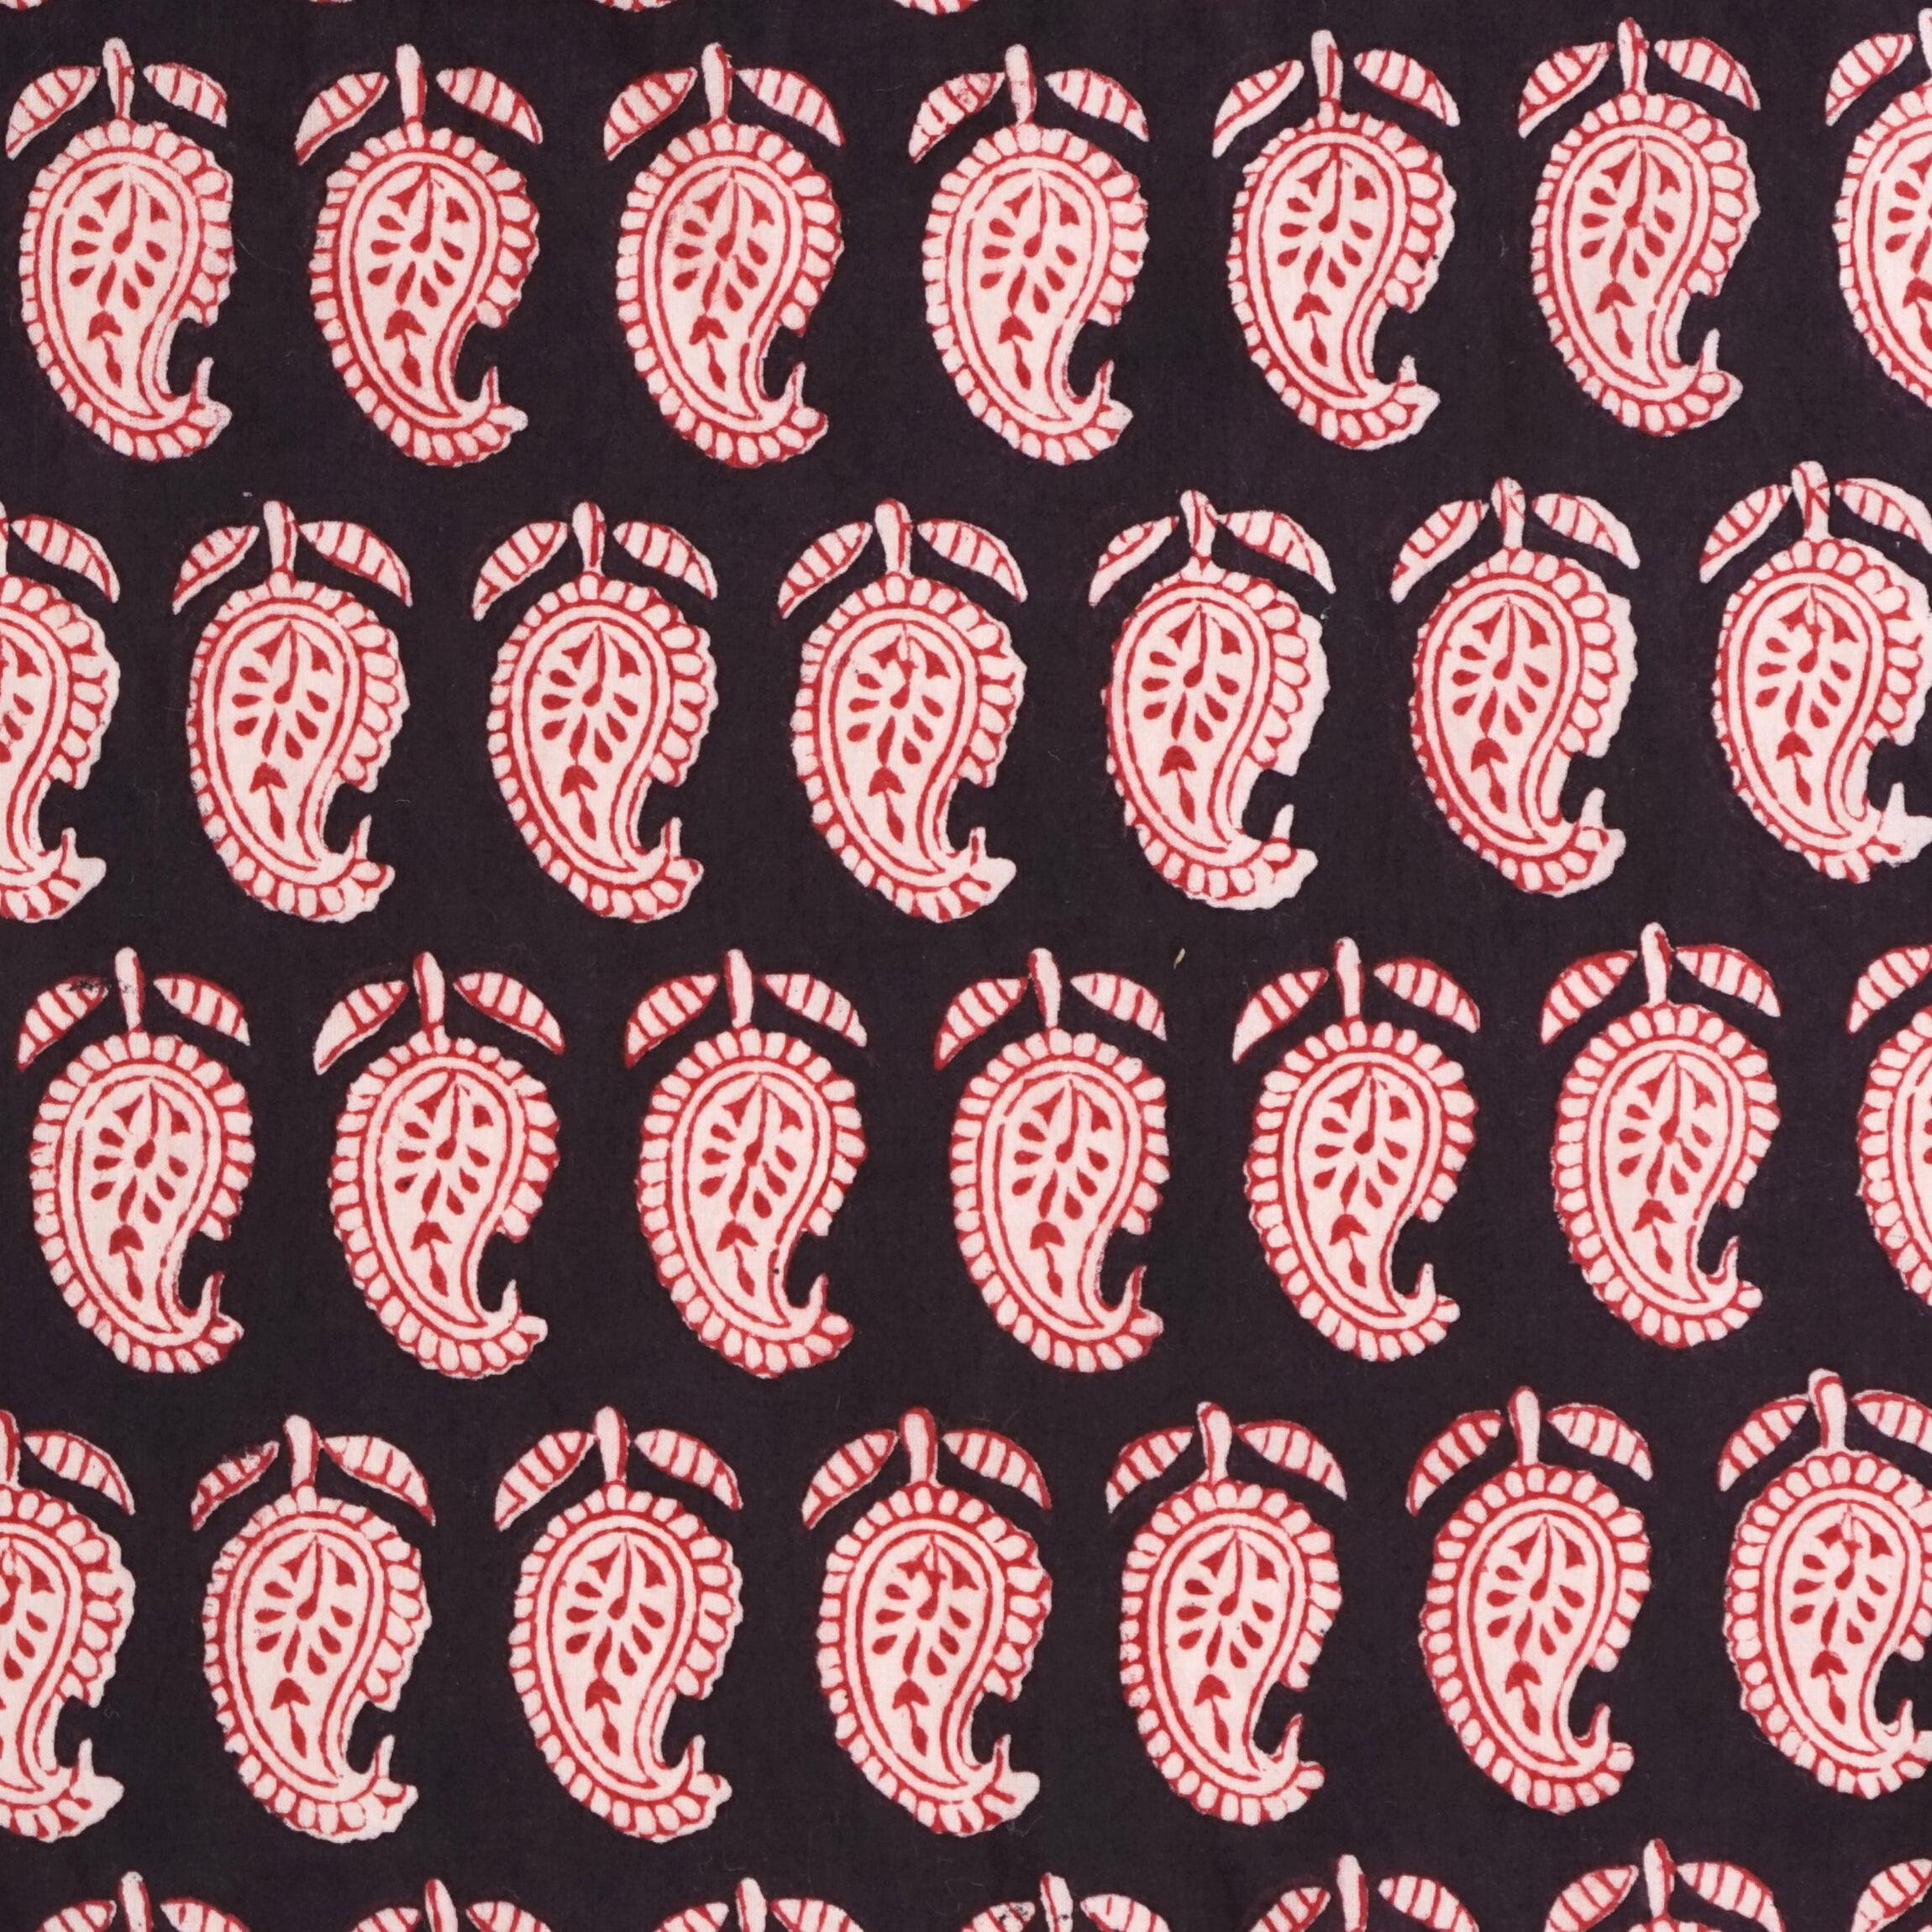 100% Block-Printed Cotton Fabric From India - Cactus Design - Iron Rust Black & Alizarin Red Dyes - Flat